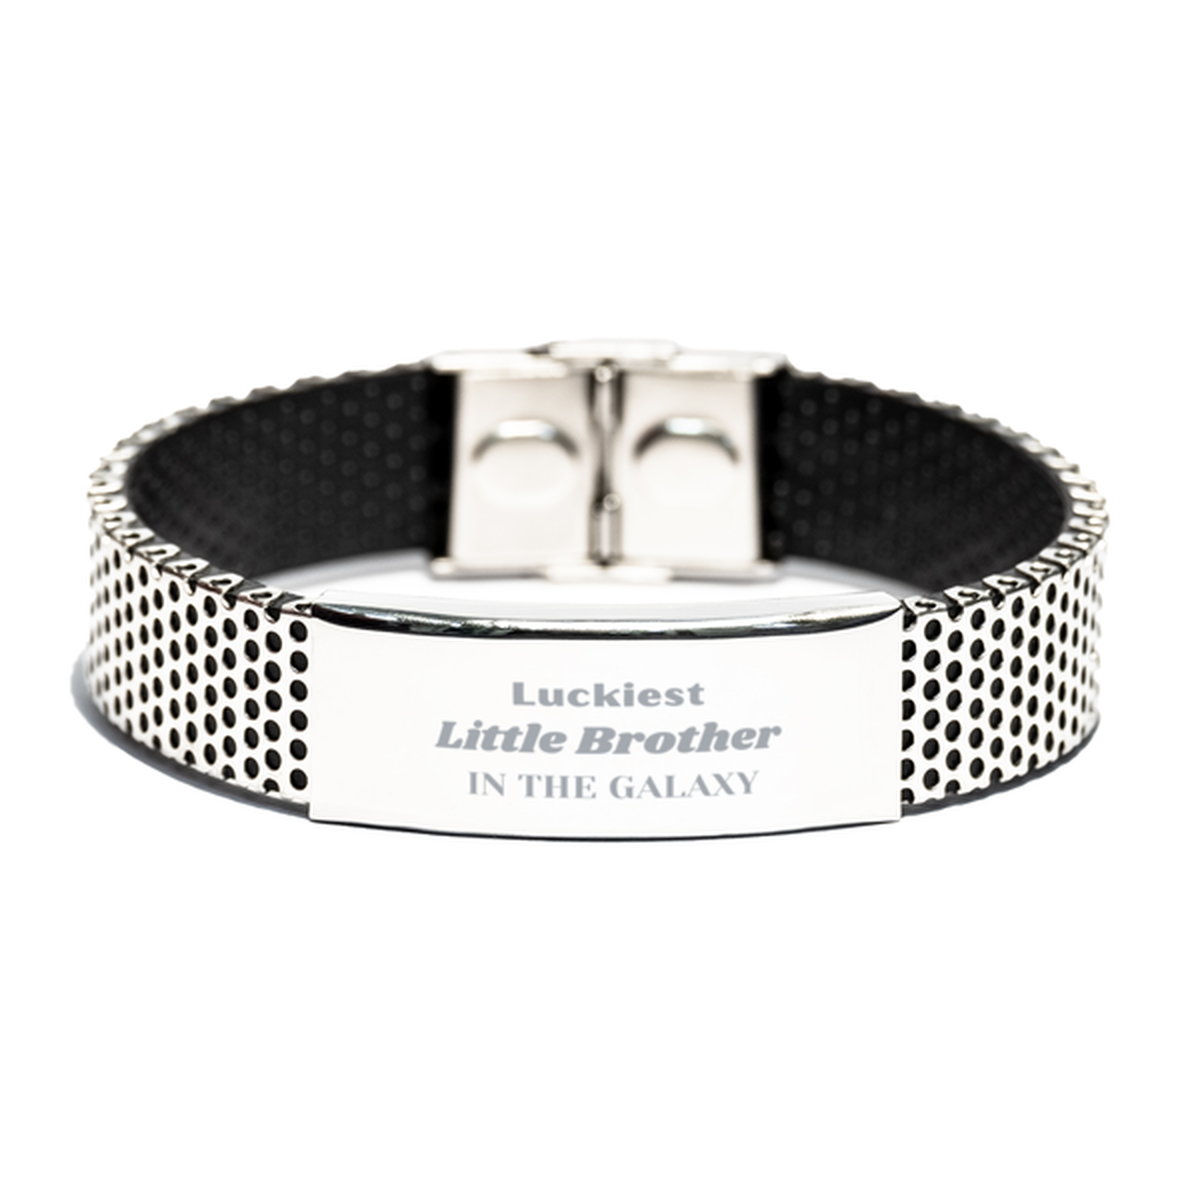 Luckiest Little Brother in the Galaxy, To My Little Brother Engraved Gifts, Christmas Little Brother Stainless Steel Bracelet Gifts, X-mas Birthday Unique Gifts For Little Brother Men Women